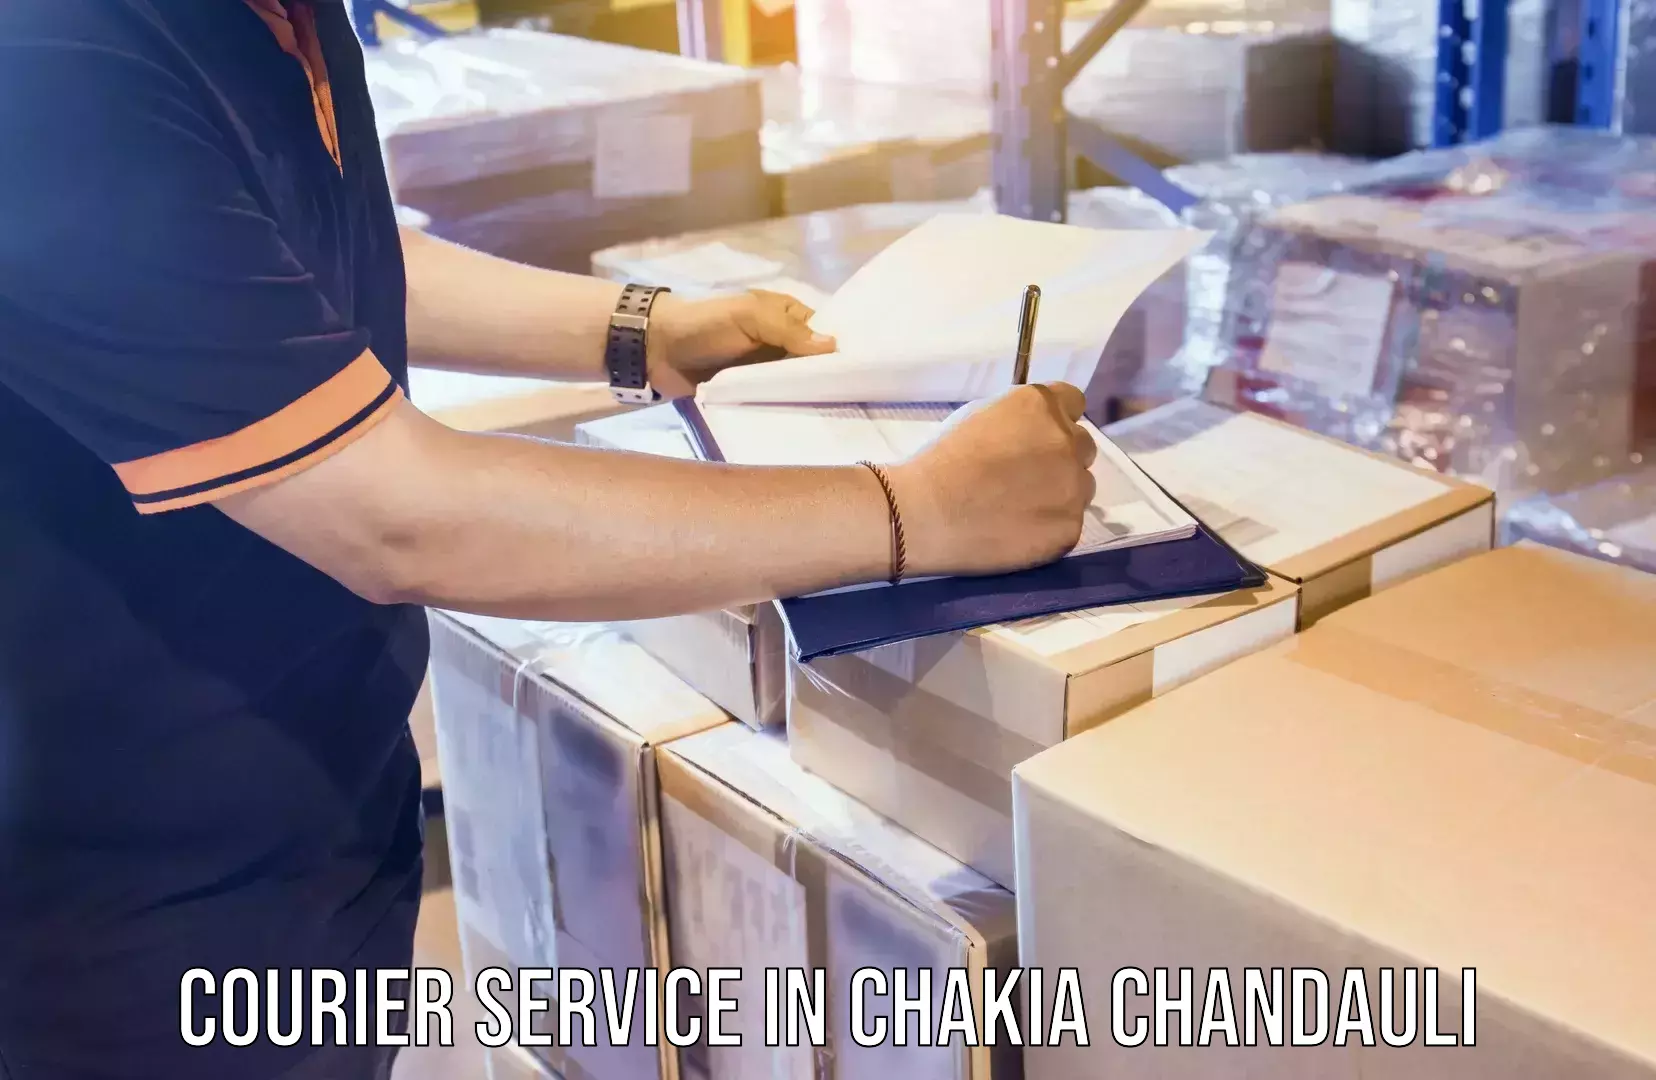 Efficient parcel delivery in Chakia Chandauli